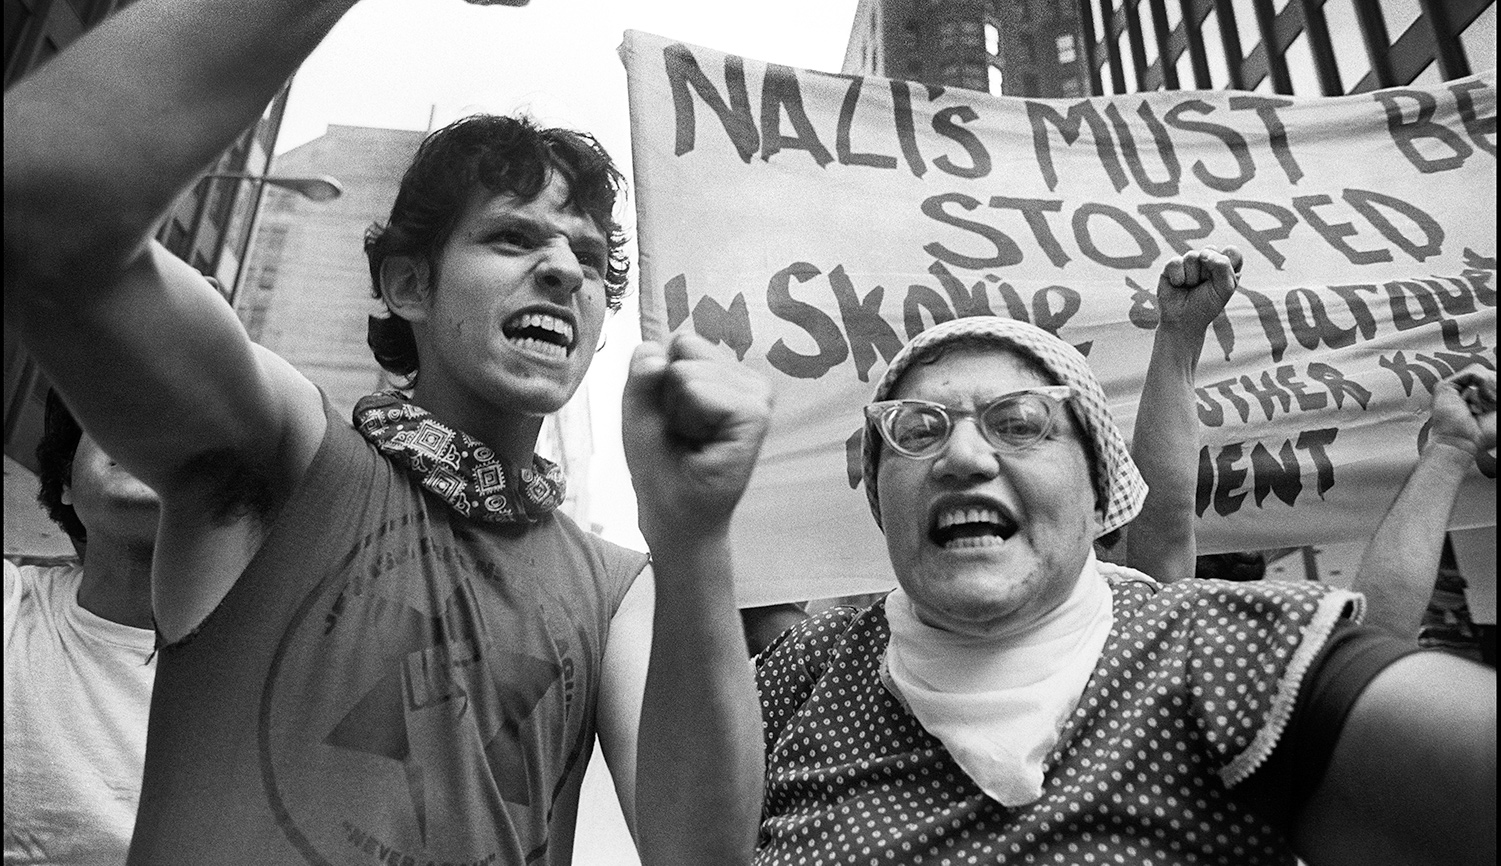 Two anti-Nazi demonstrators during a counter-protest to a nearby neo-Nazi rally in Illinois on June 24, 1978. Chuck Fishman/Getty Images.
